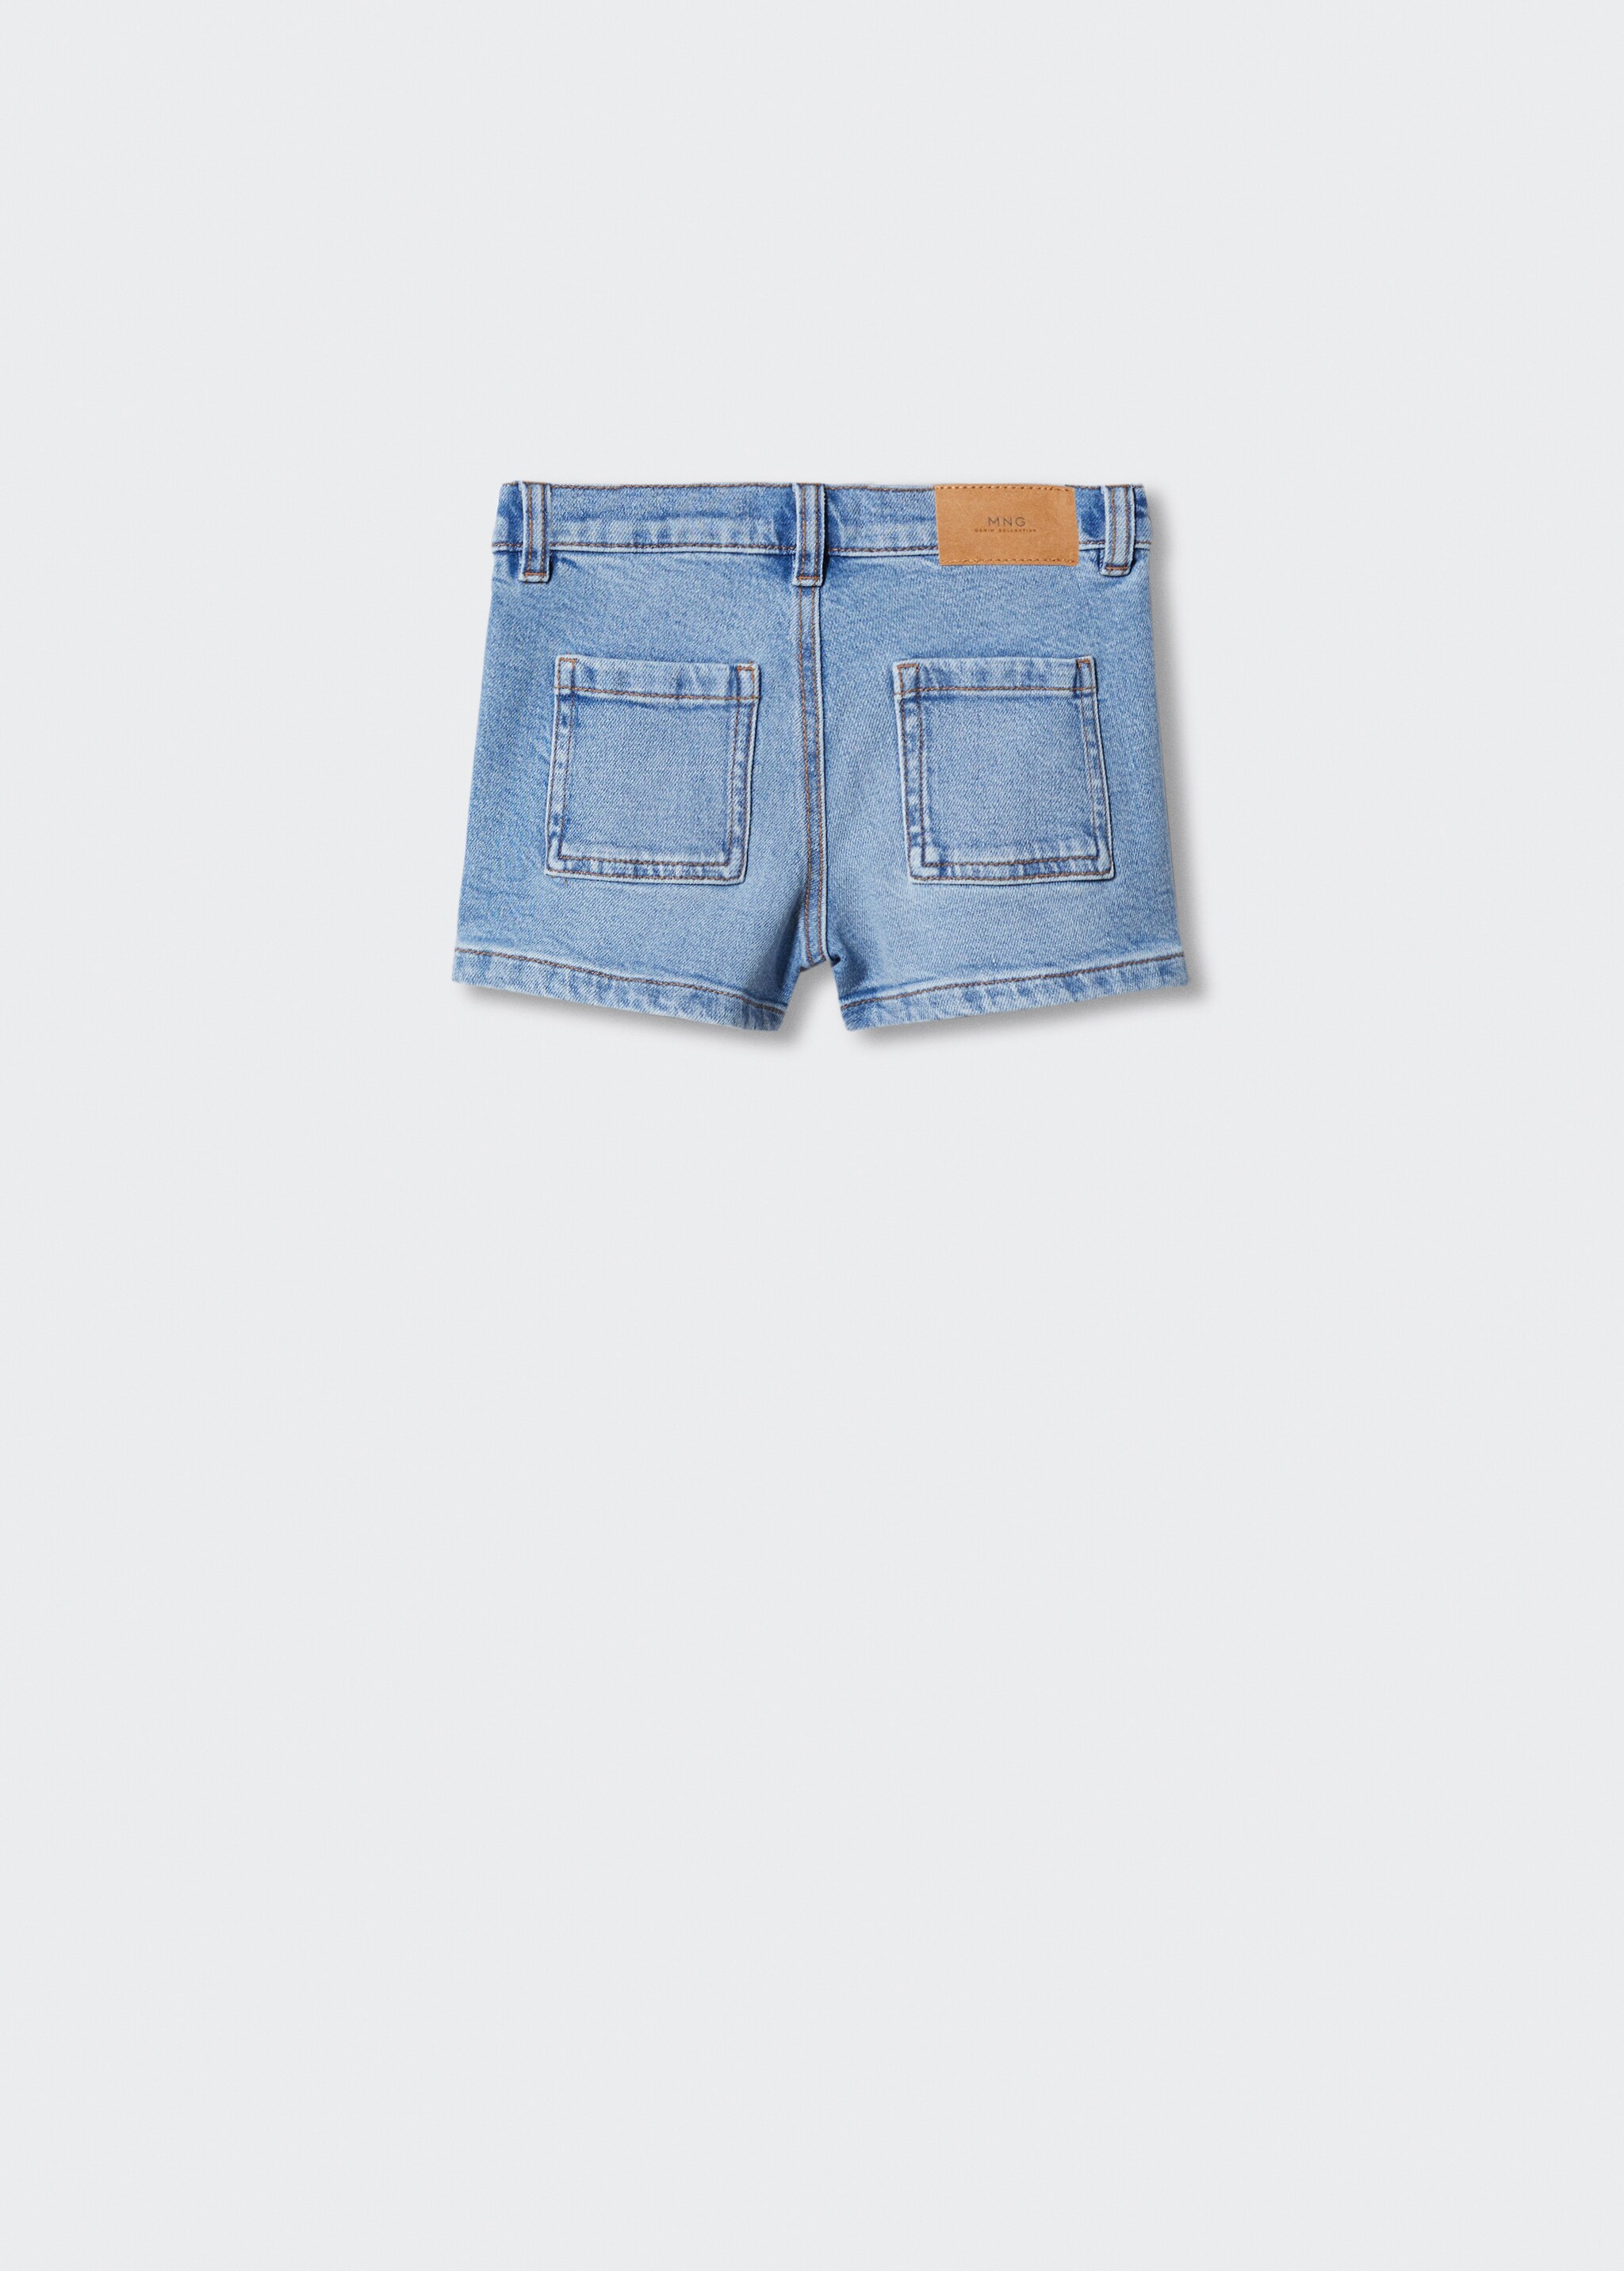 Denim shorts with pockets - Reverse of the article